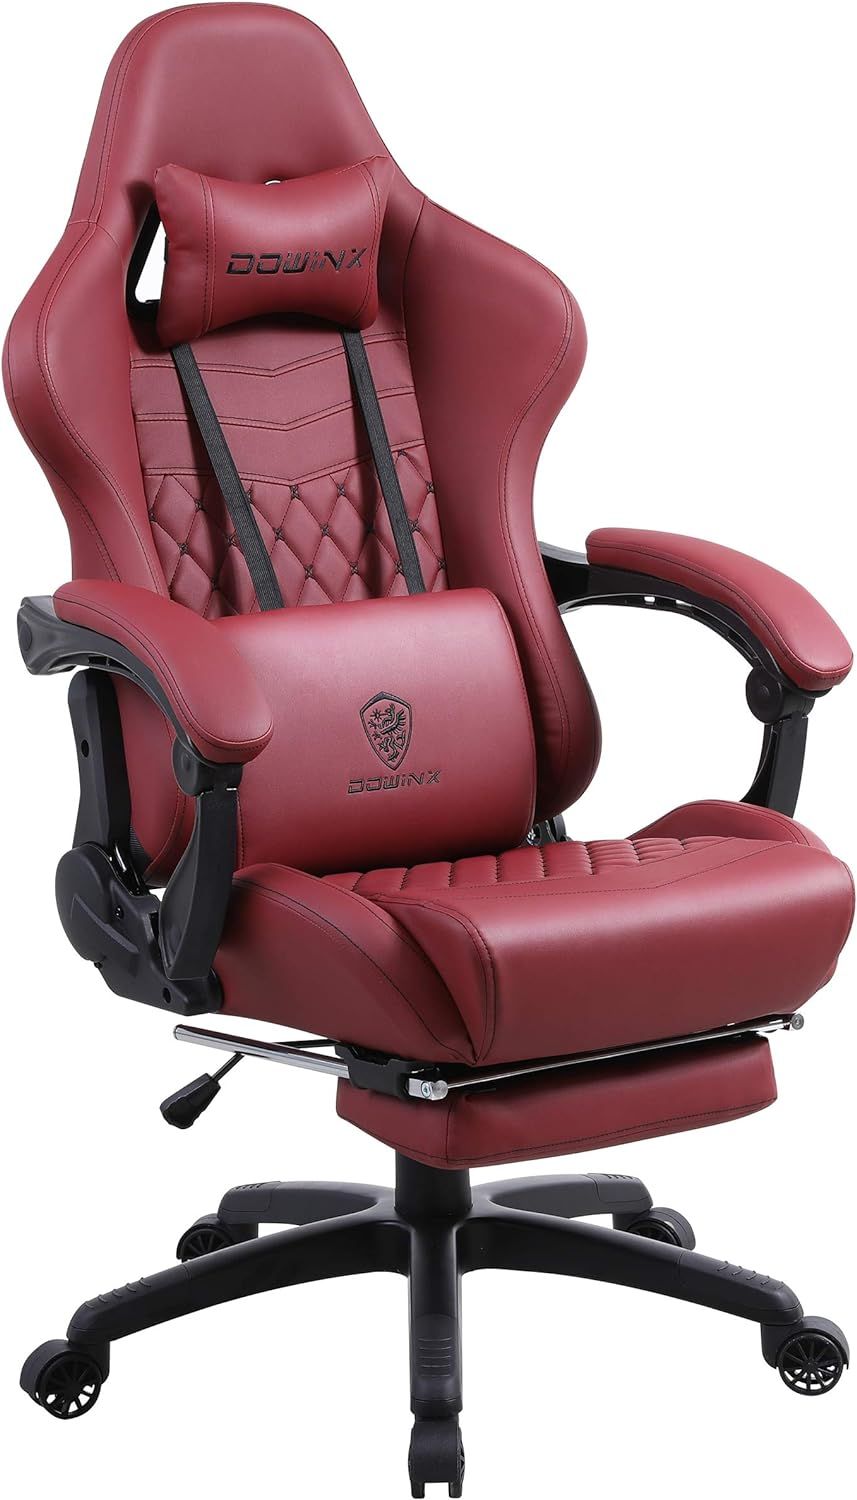 Dowinx Gaming Chair Office Desk Chair 